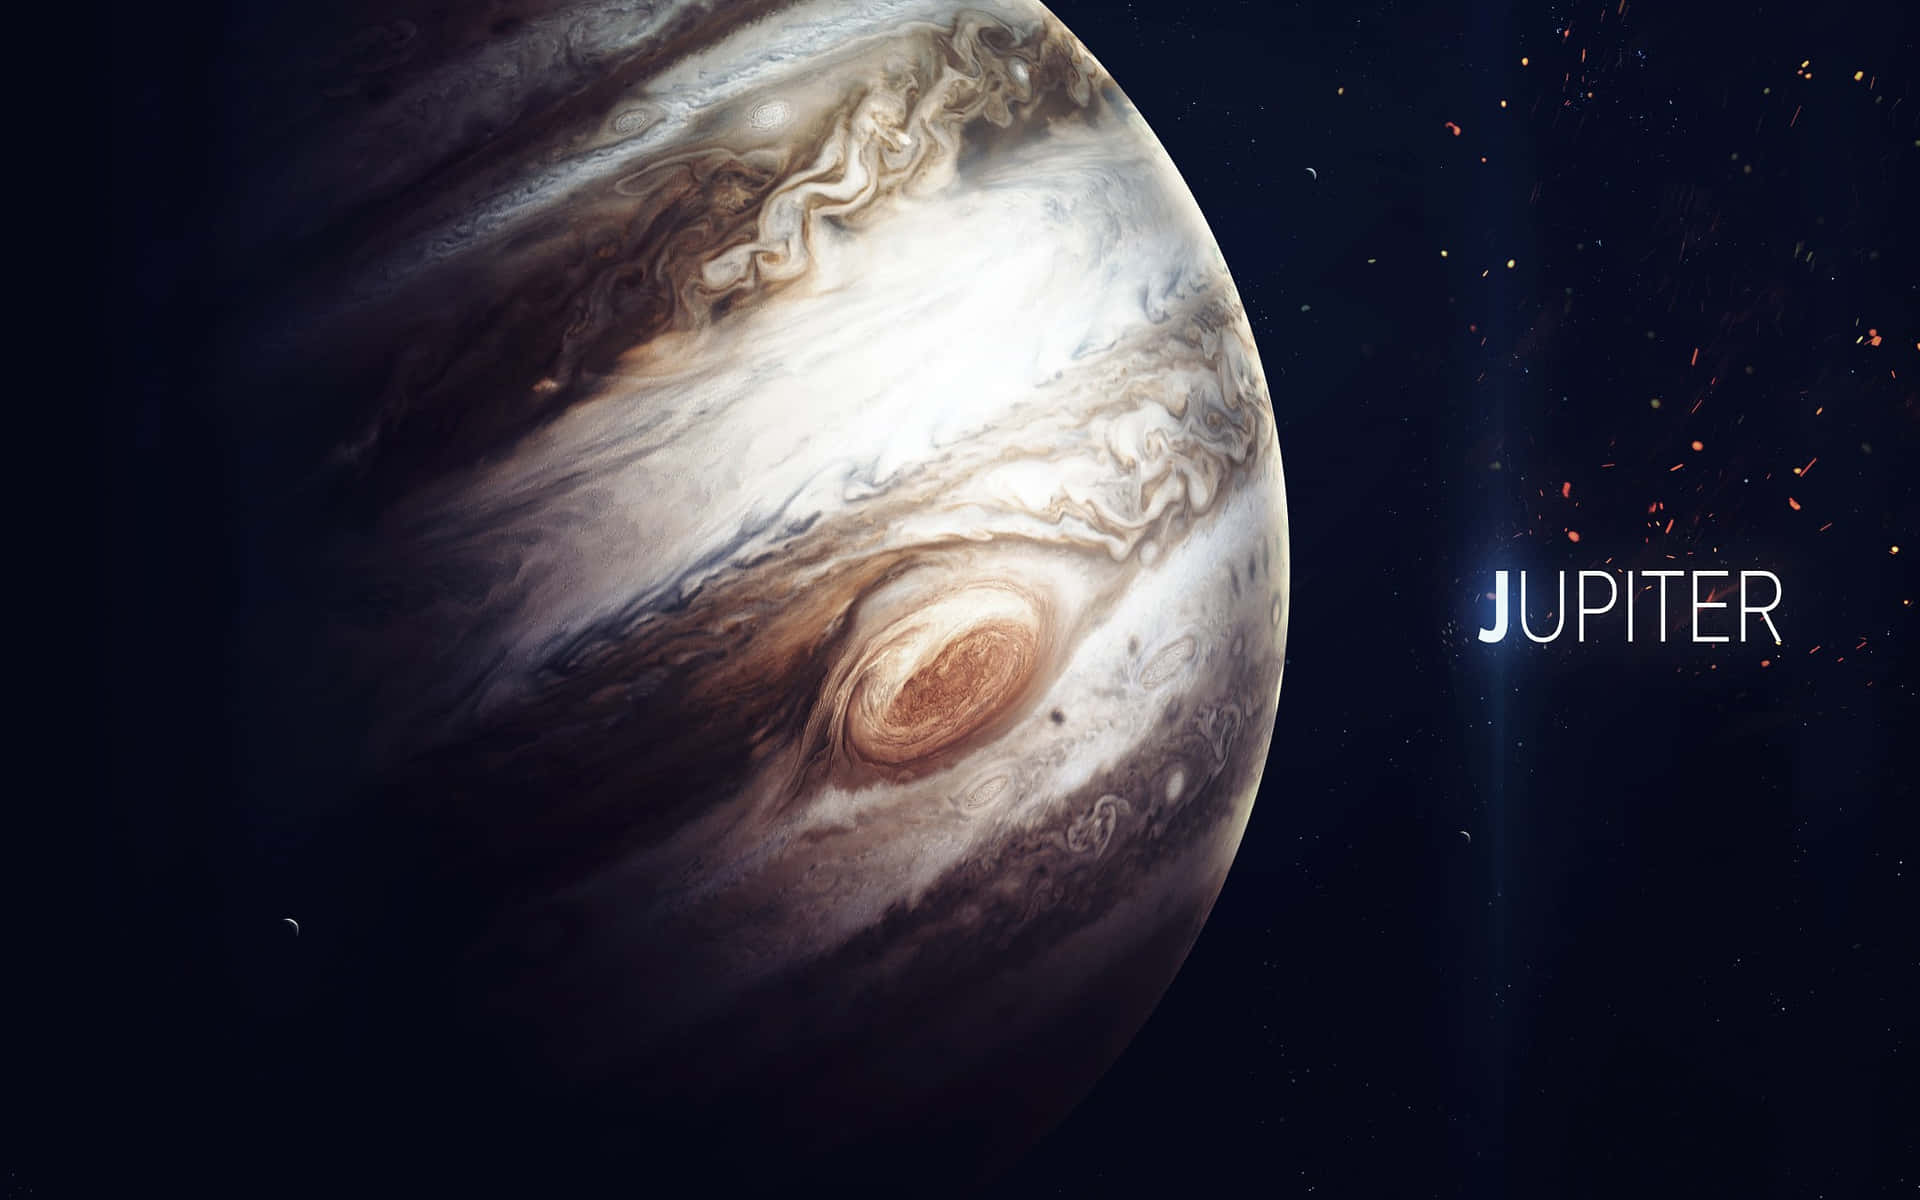 A breathtaking image of Jupiter in space